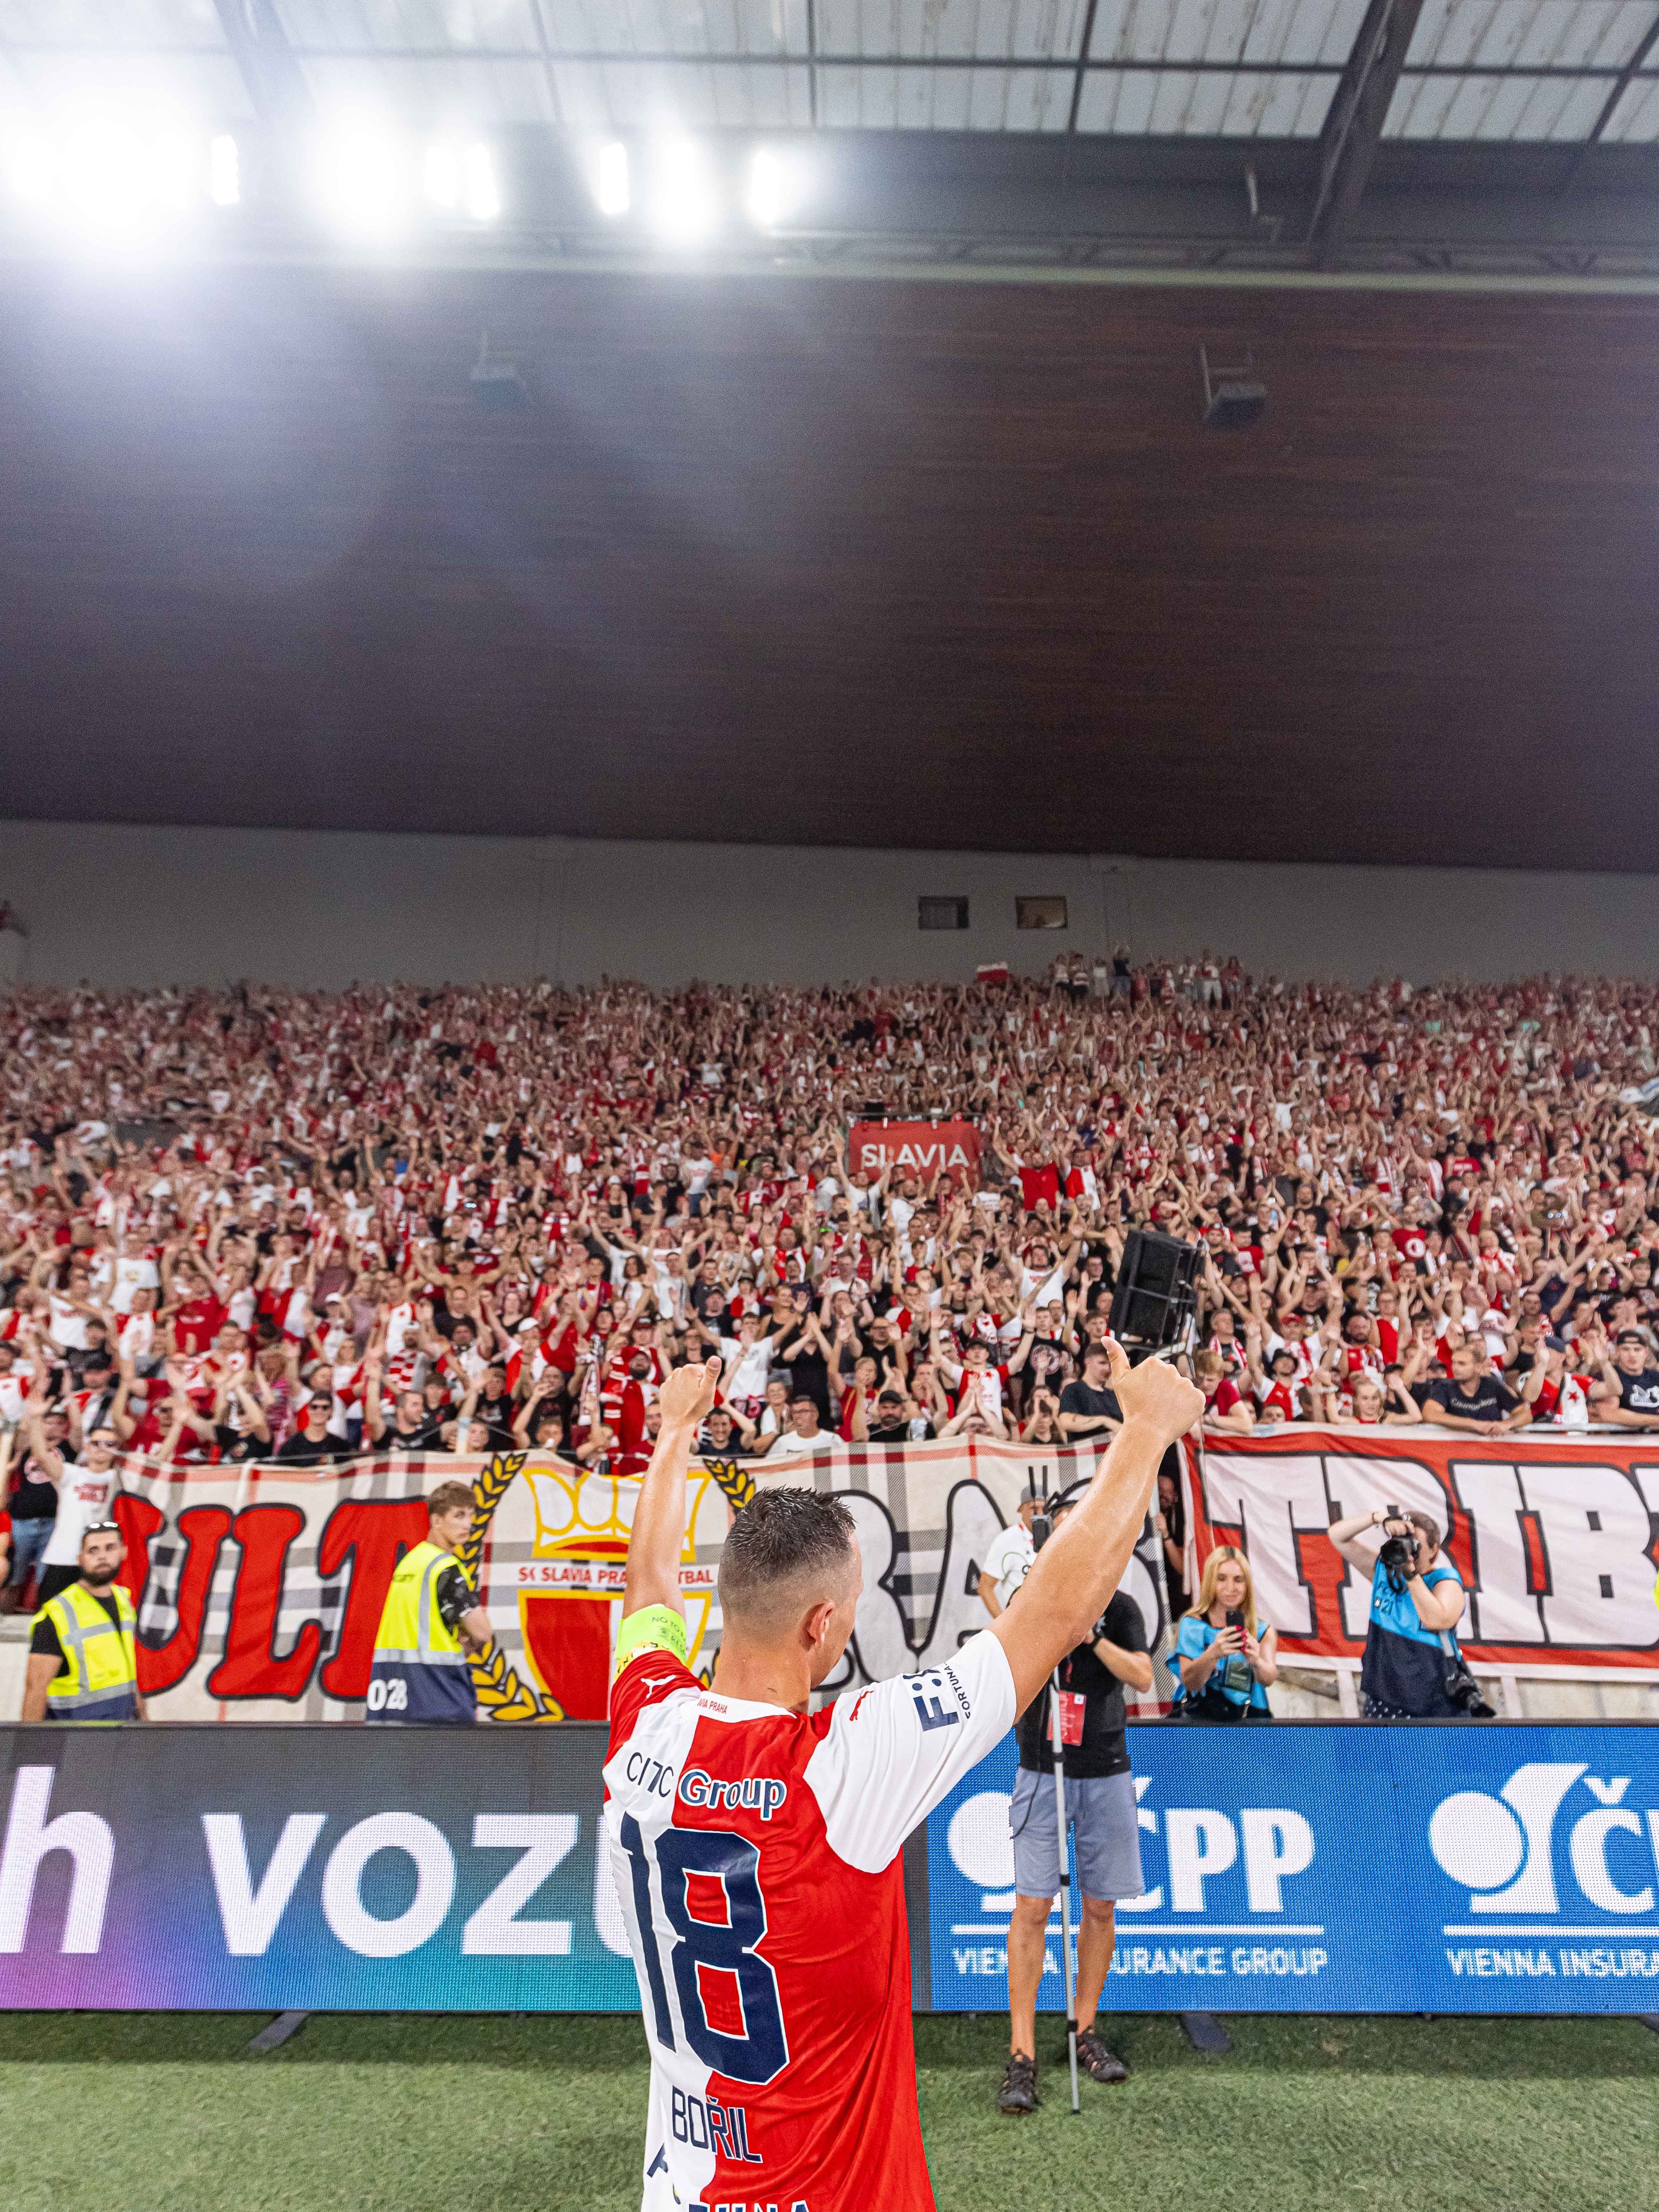 SK Slavia Prague EN on X: This is the only Eden you need to know! 🔴⚪️📢  𝟭𝟵 𝟭𝟲𝟰 fans attended the game against Baník. General sale for the  Thursday #UEL game against